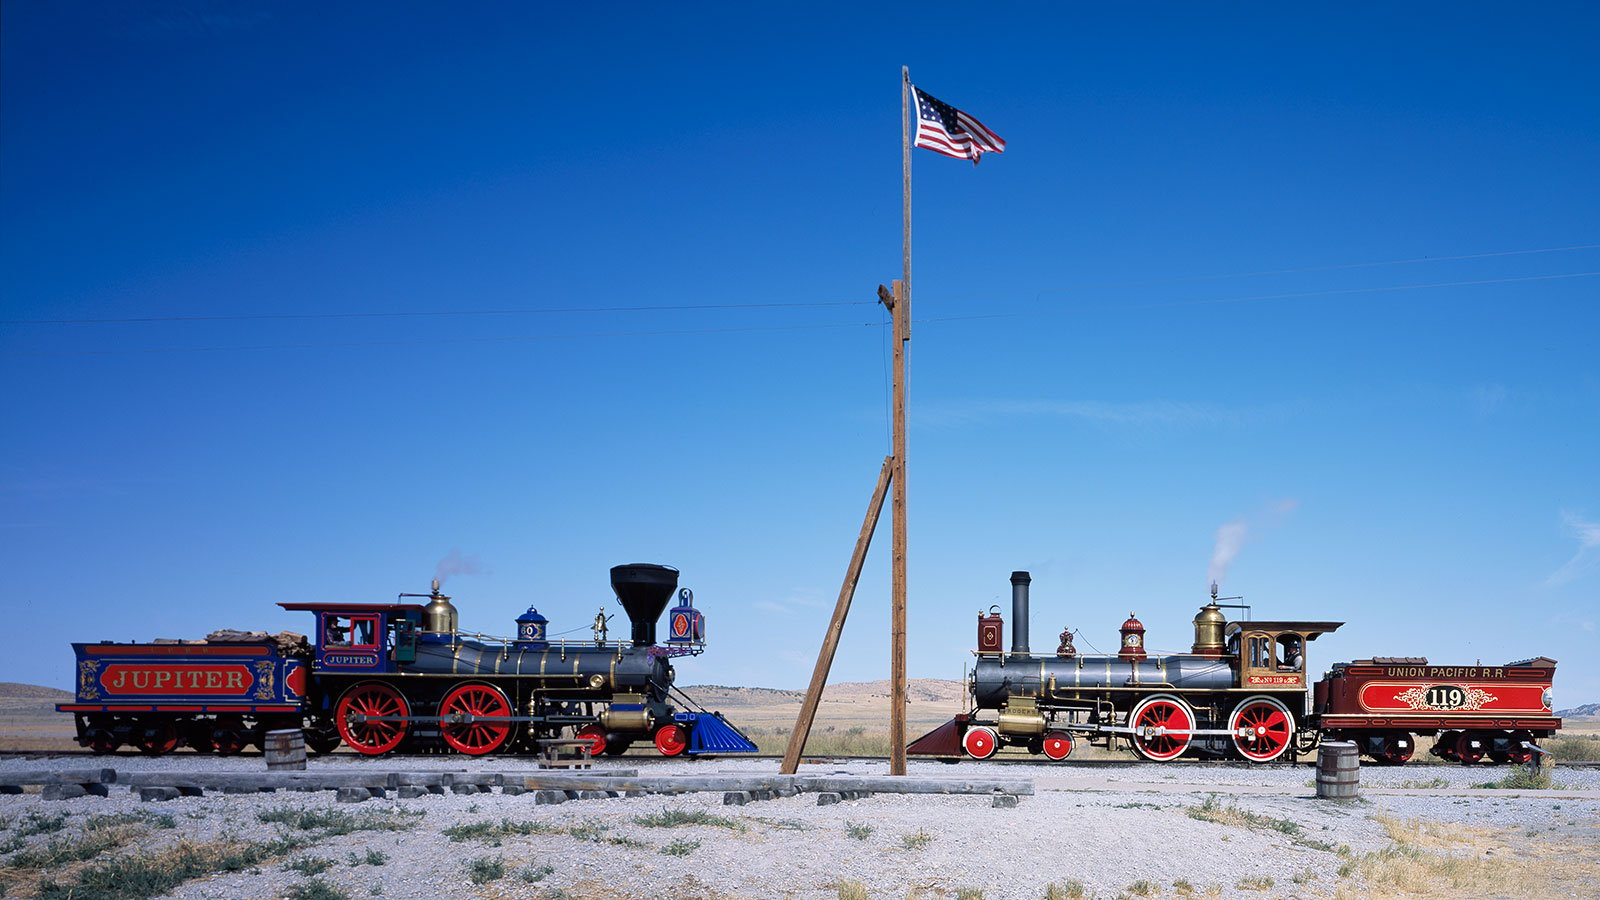 A meeting of the engines at the Golden Spike National Historic Site, Utah